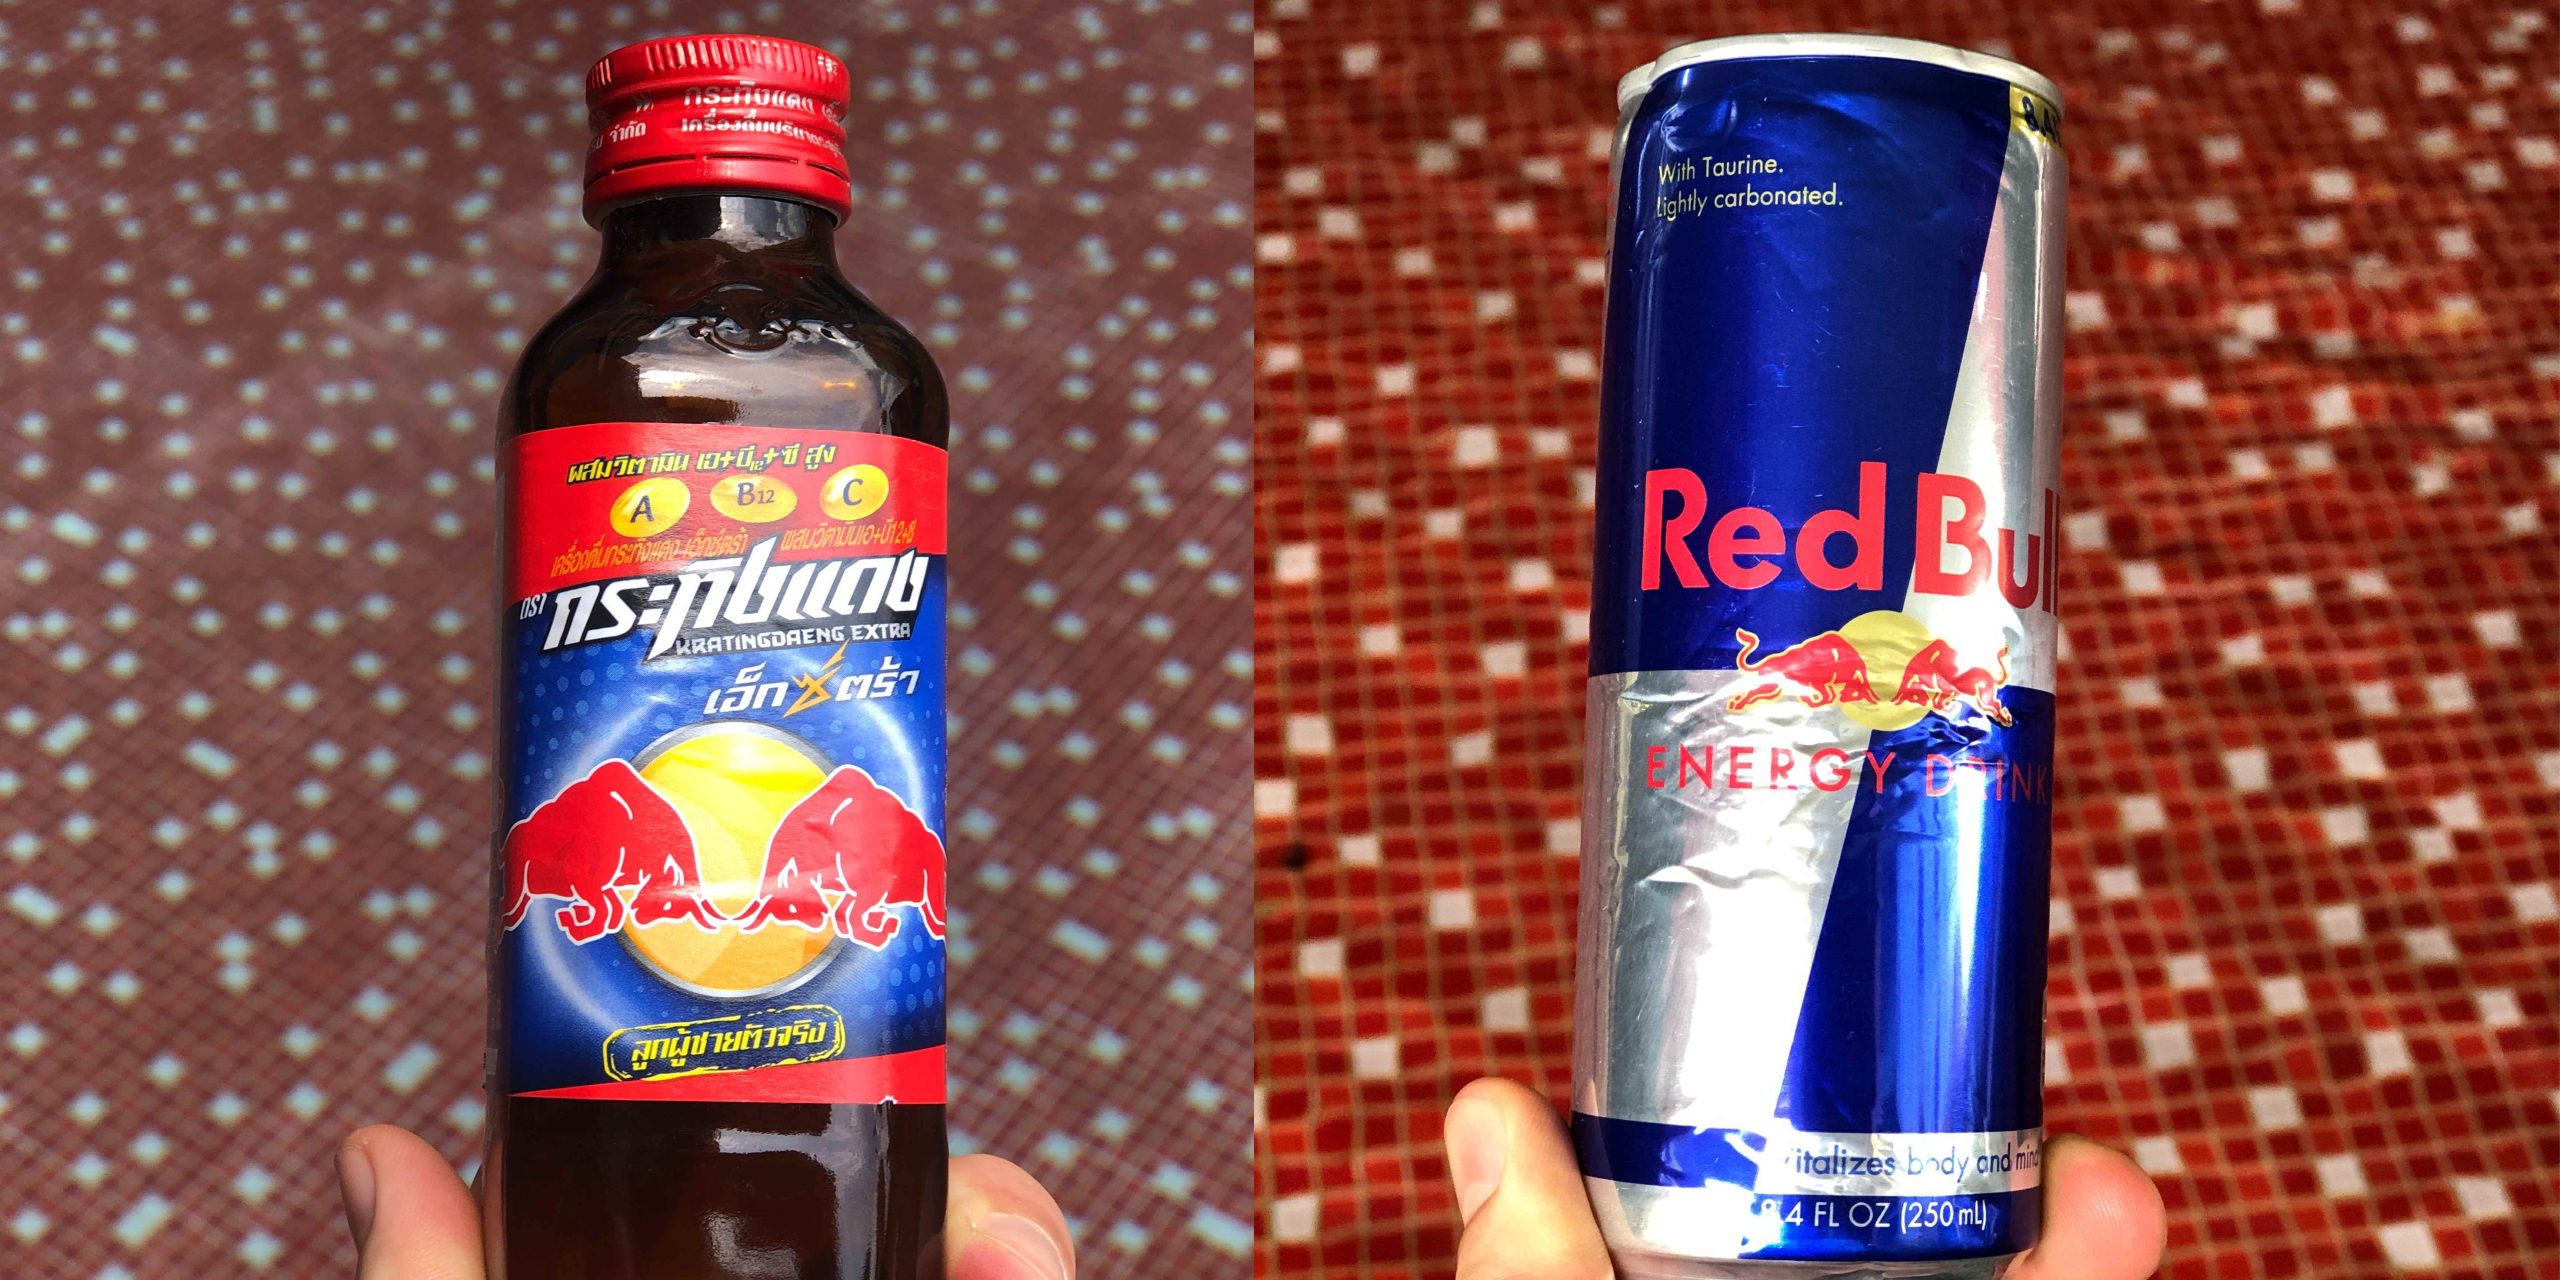 Krating Daeng VS Red Bull (What’s the difference?)